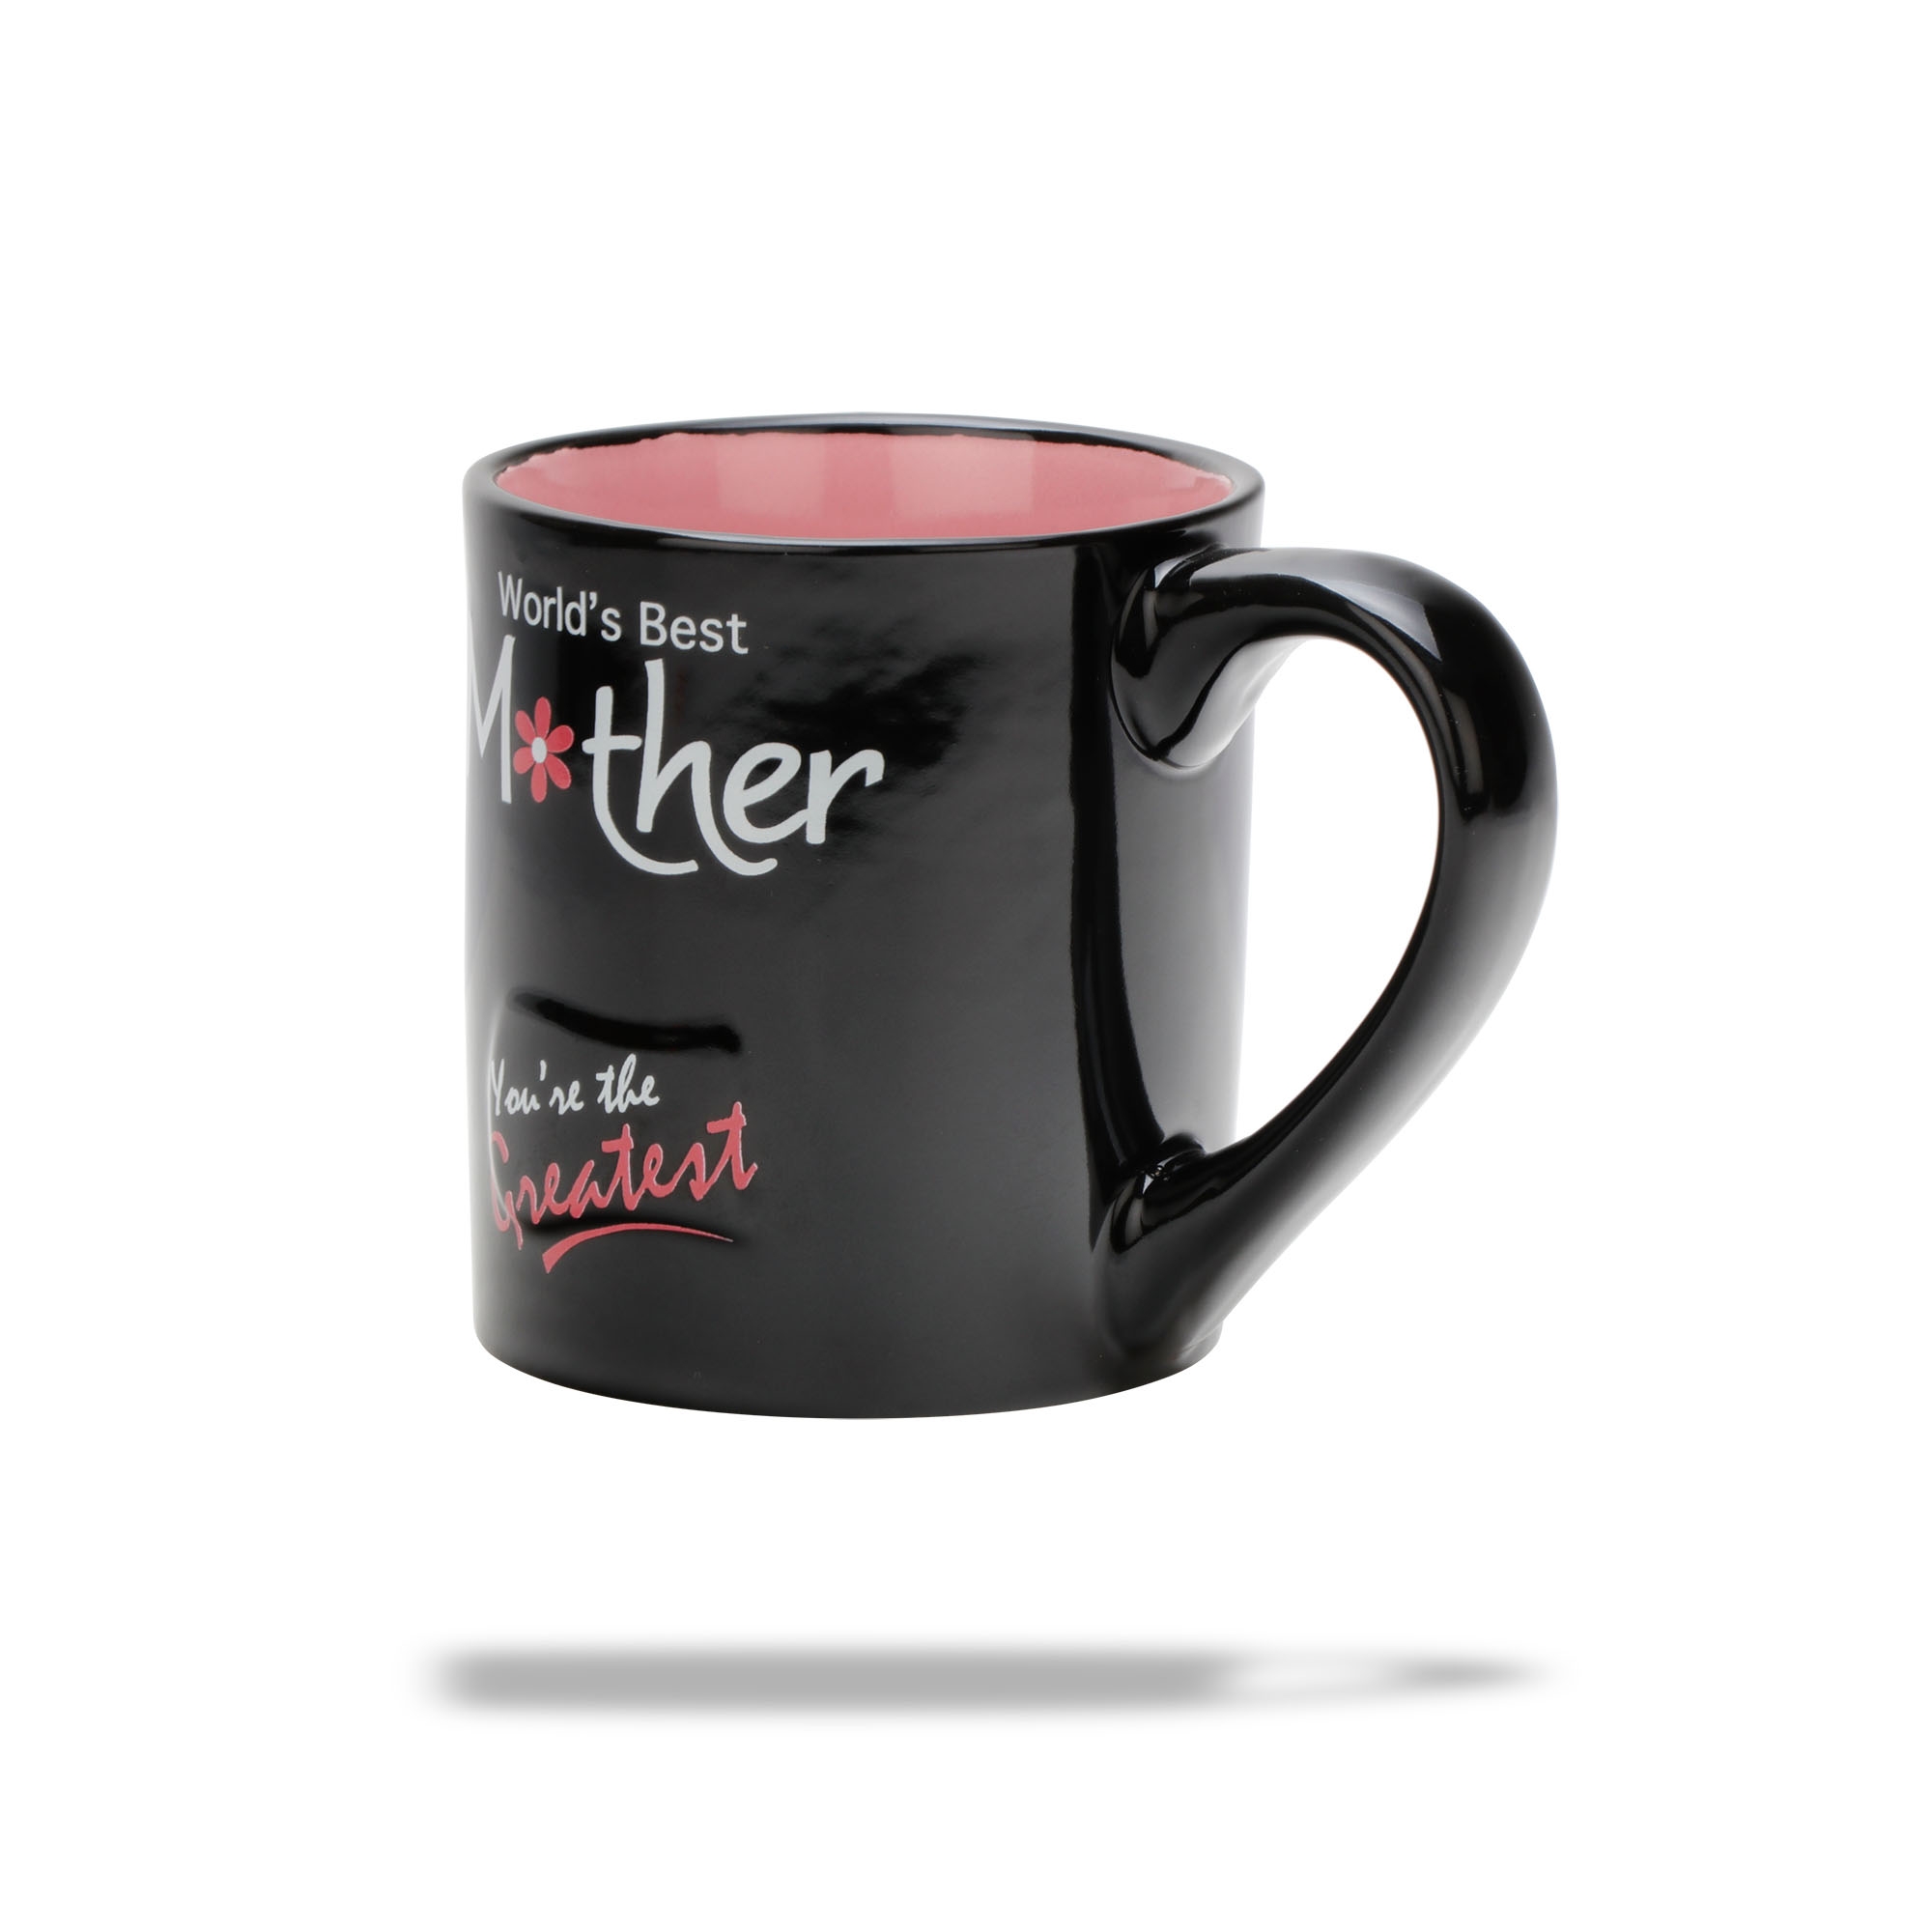 Archies | ARCHIES CERAMIC COFFEE MUG WITH WORLD'S BEST MOTHER PRINTED  1